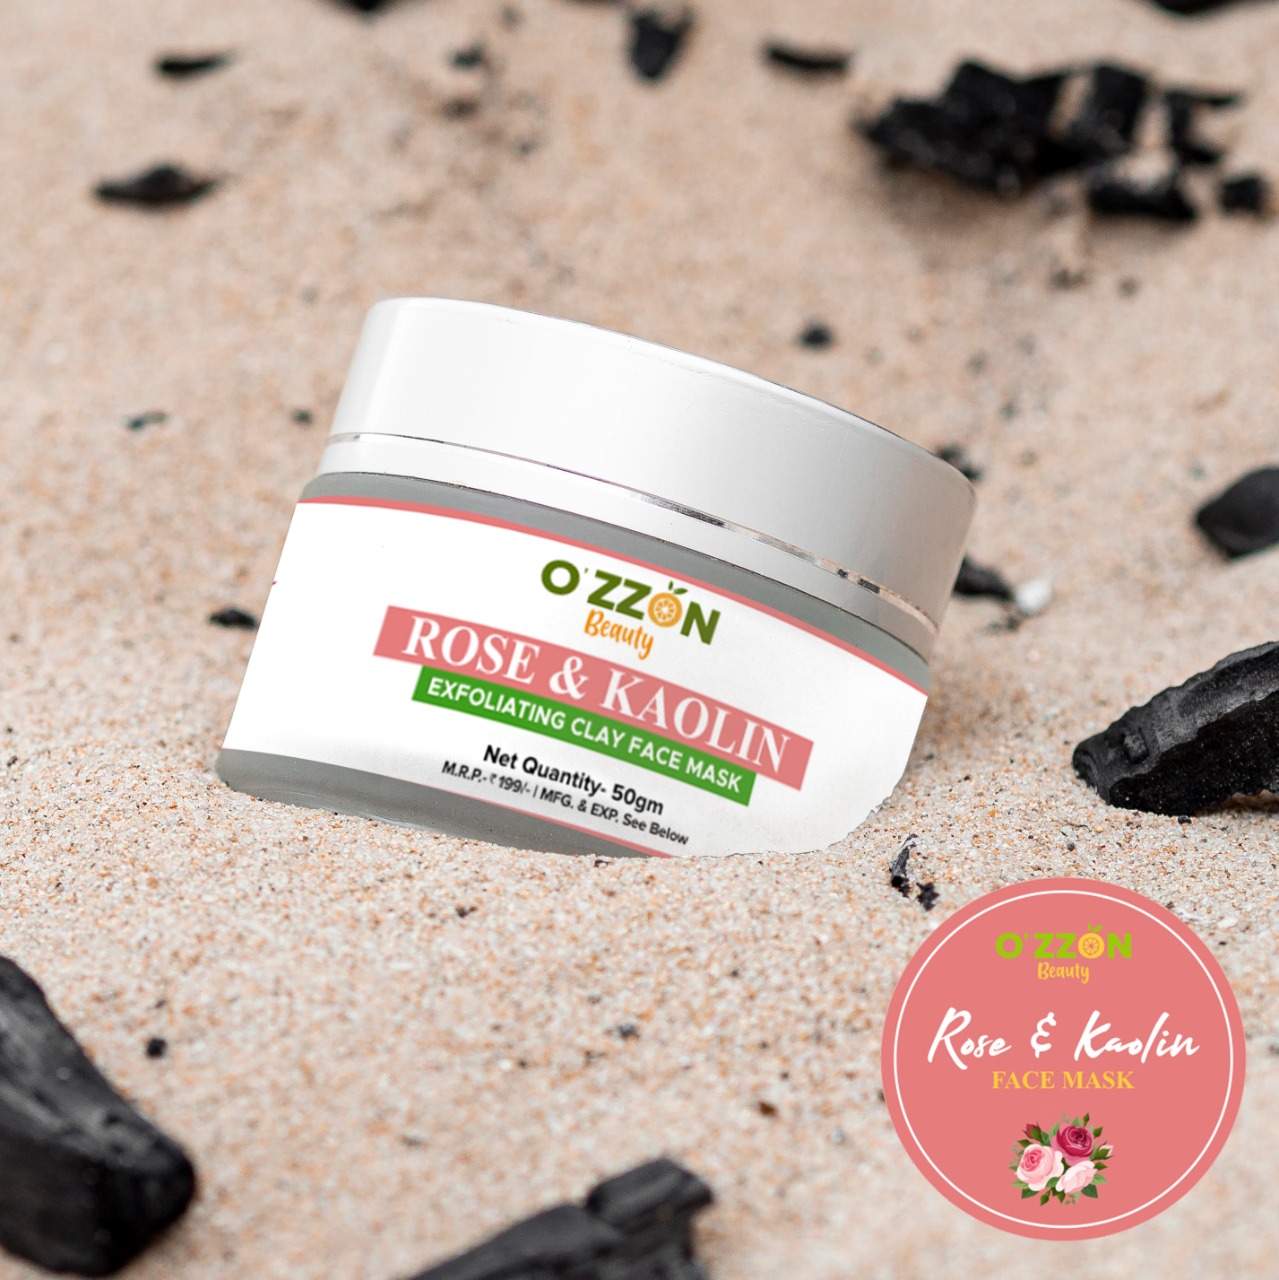 Online Shopping India, Ozzon Products, Rose & Kaolin Face Mask, Ozzon,